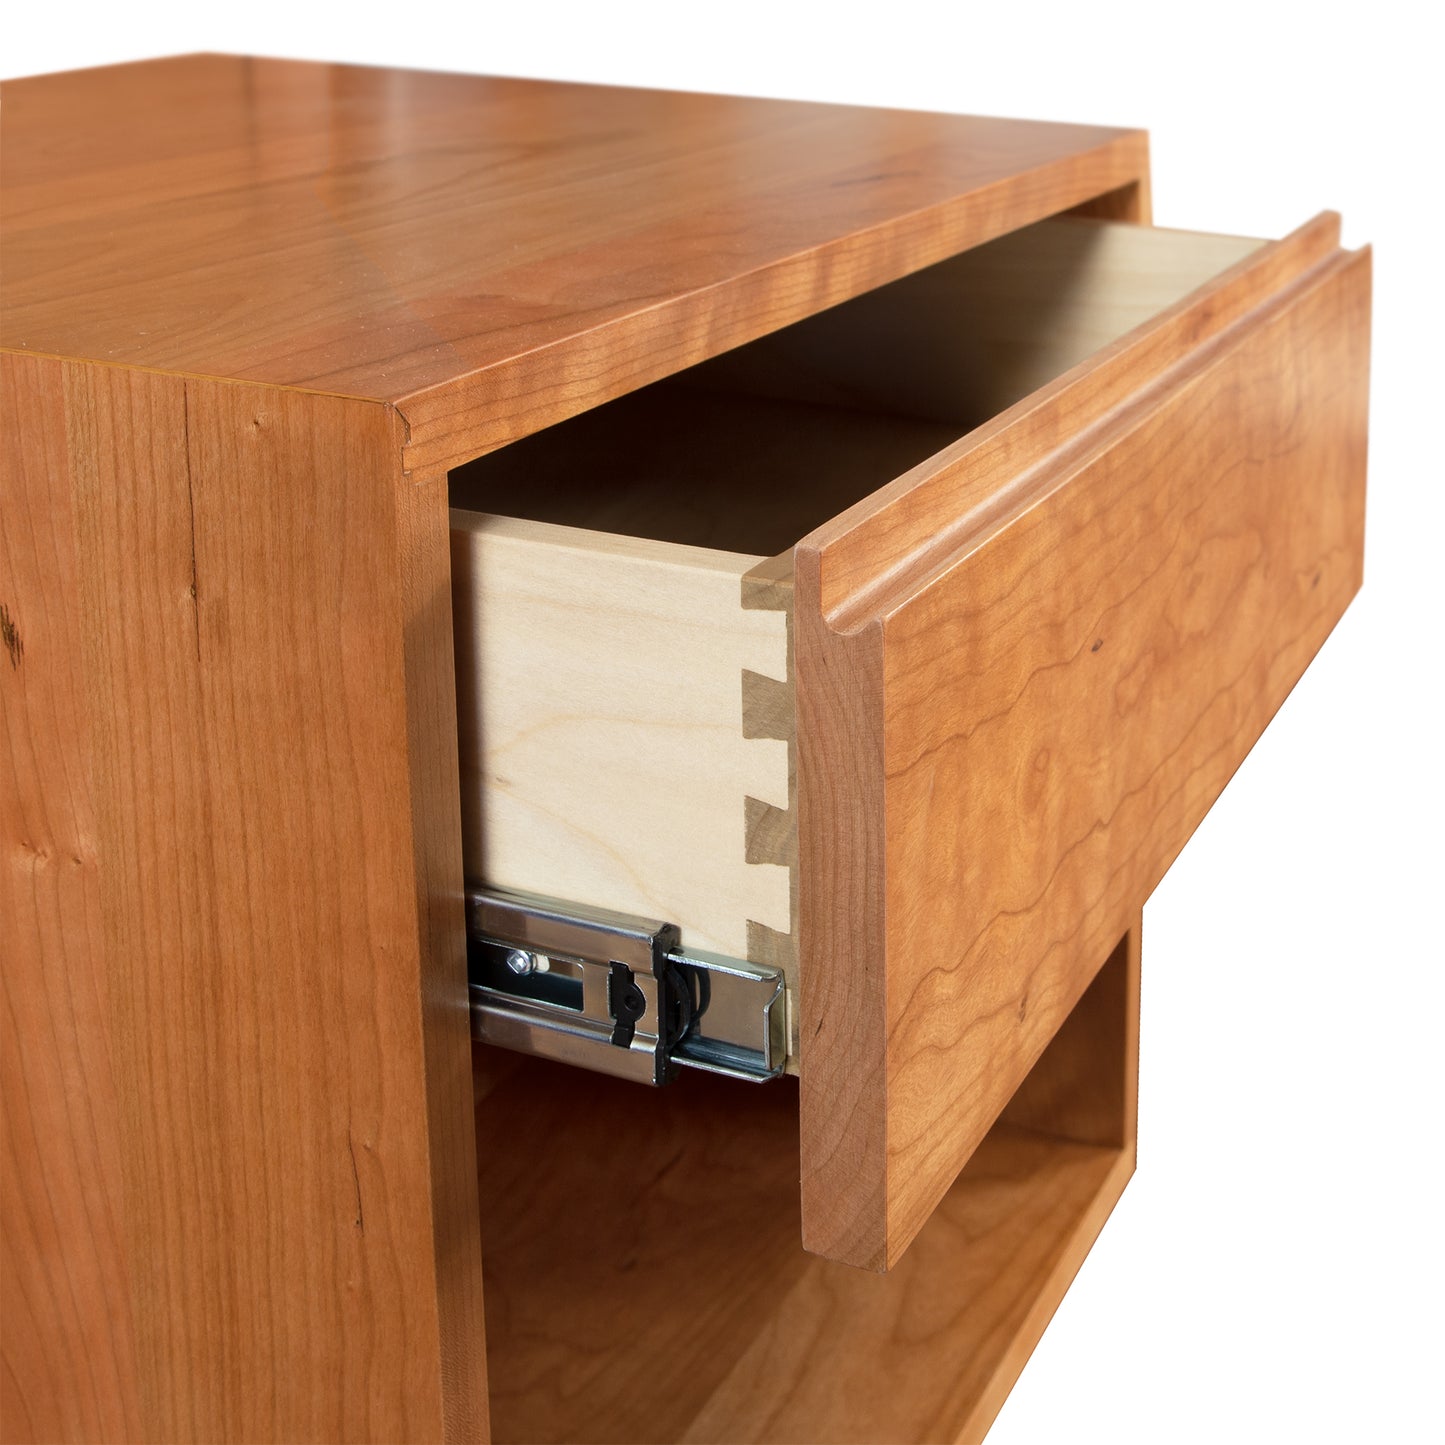 A Sutton 1-Drawer Enclosed Shelf Nightstand made by Lyndon Furniture, handcrafted from solid wood and with an open drawer.